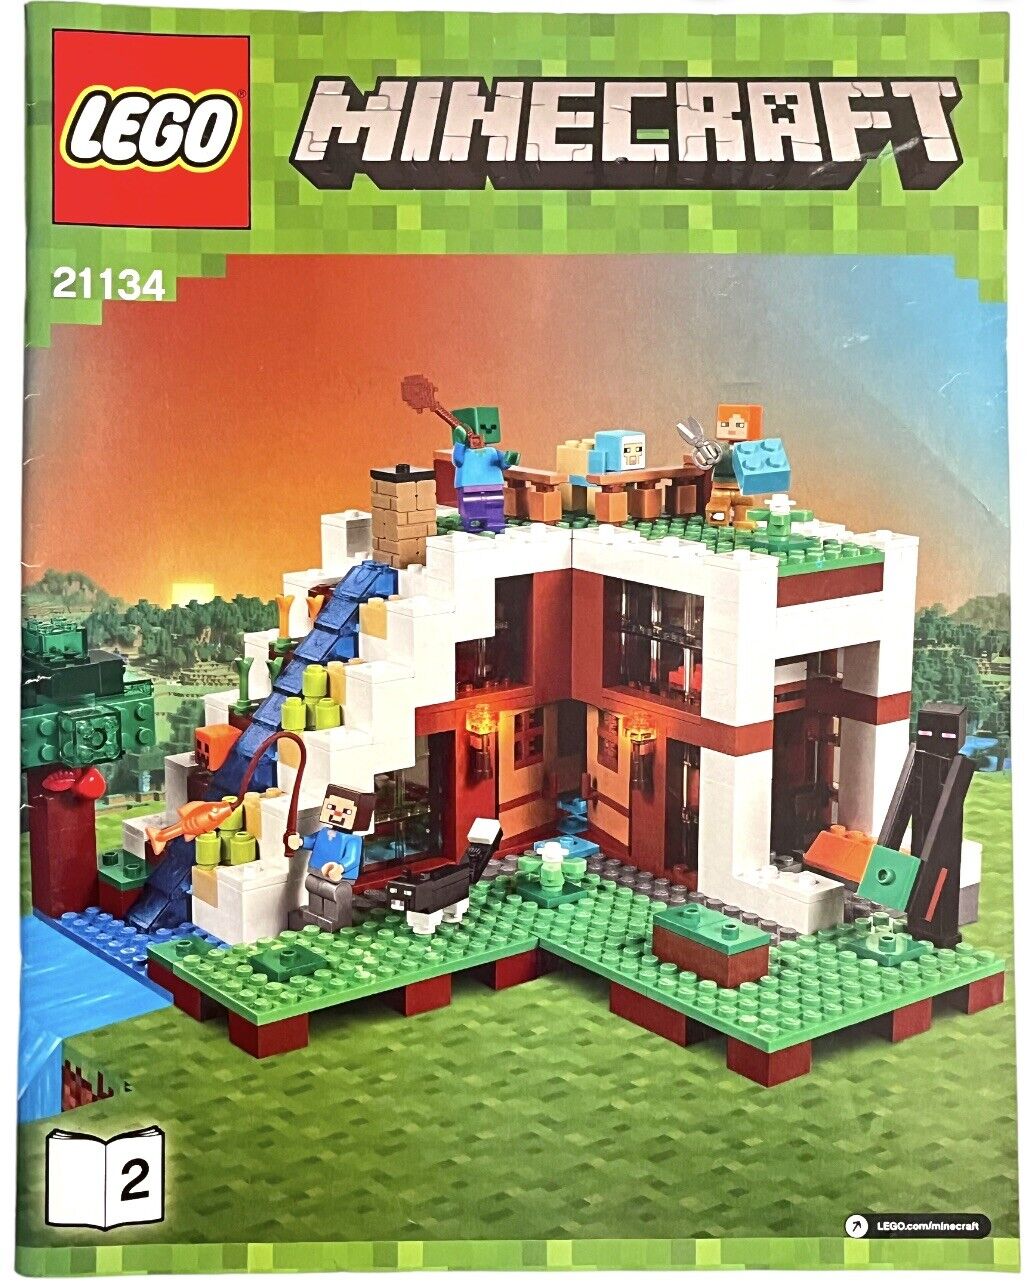 LEGO The Skull Arena Minecraft (21134), Booklet Manual